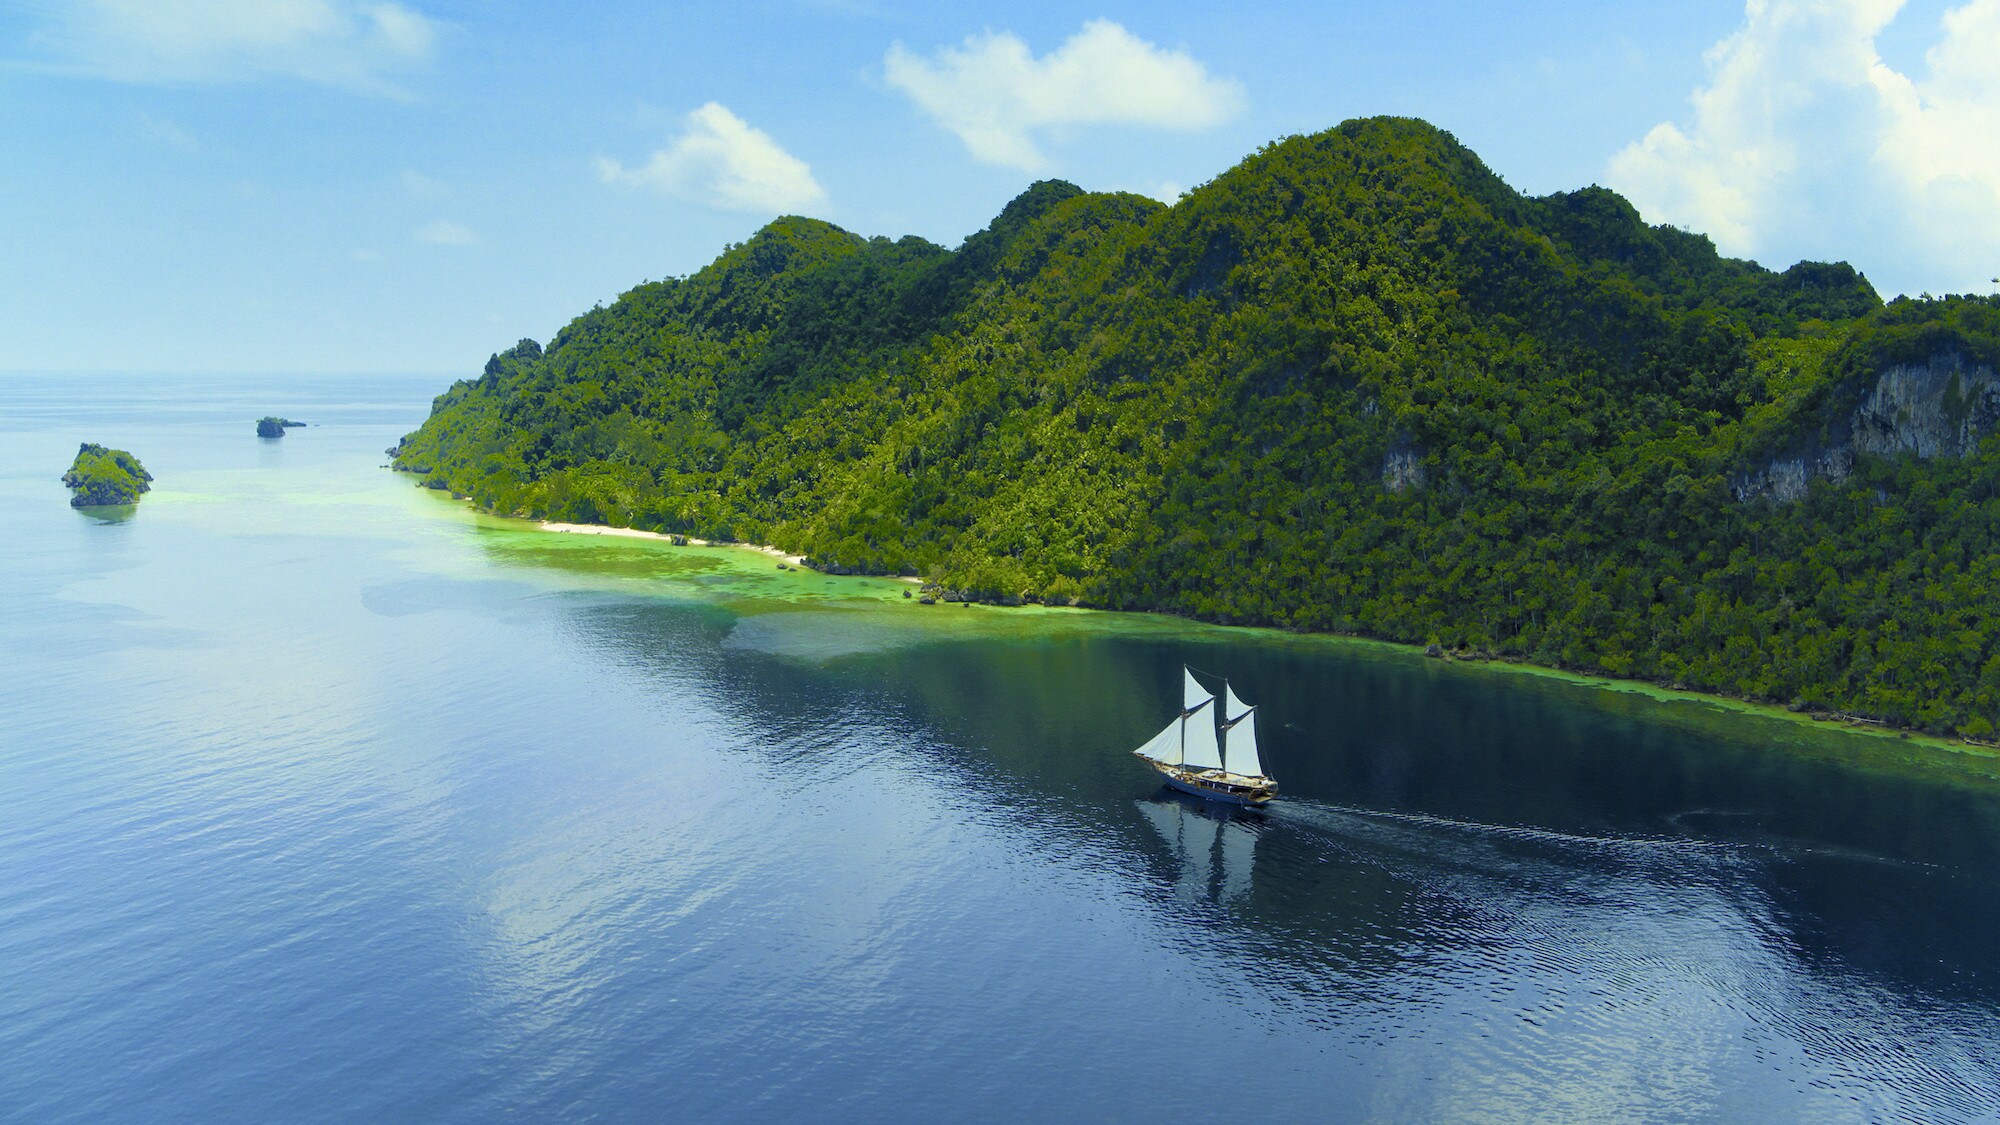 Dewata sailing with islands in the background. (National Geographic for Disney+/Bertie Gregory)